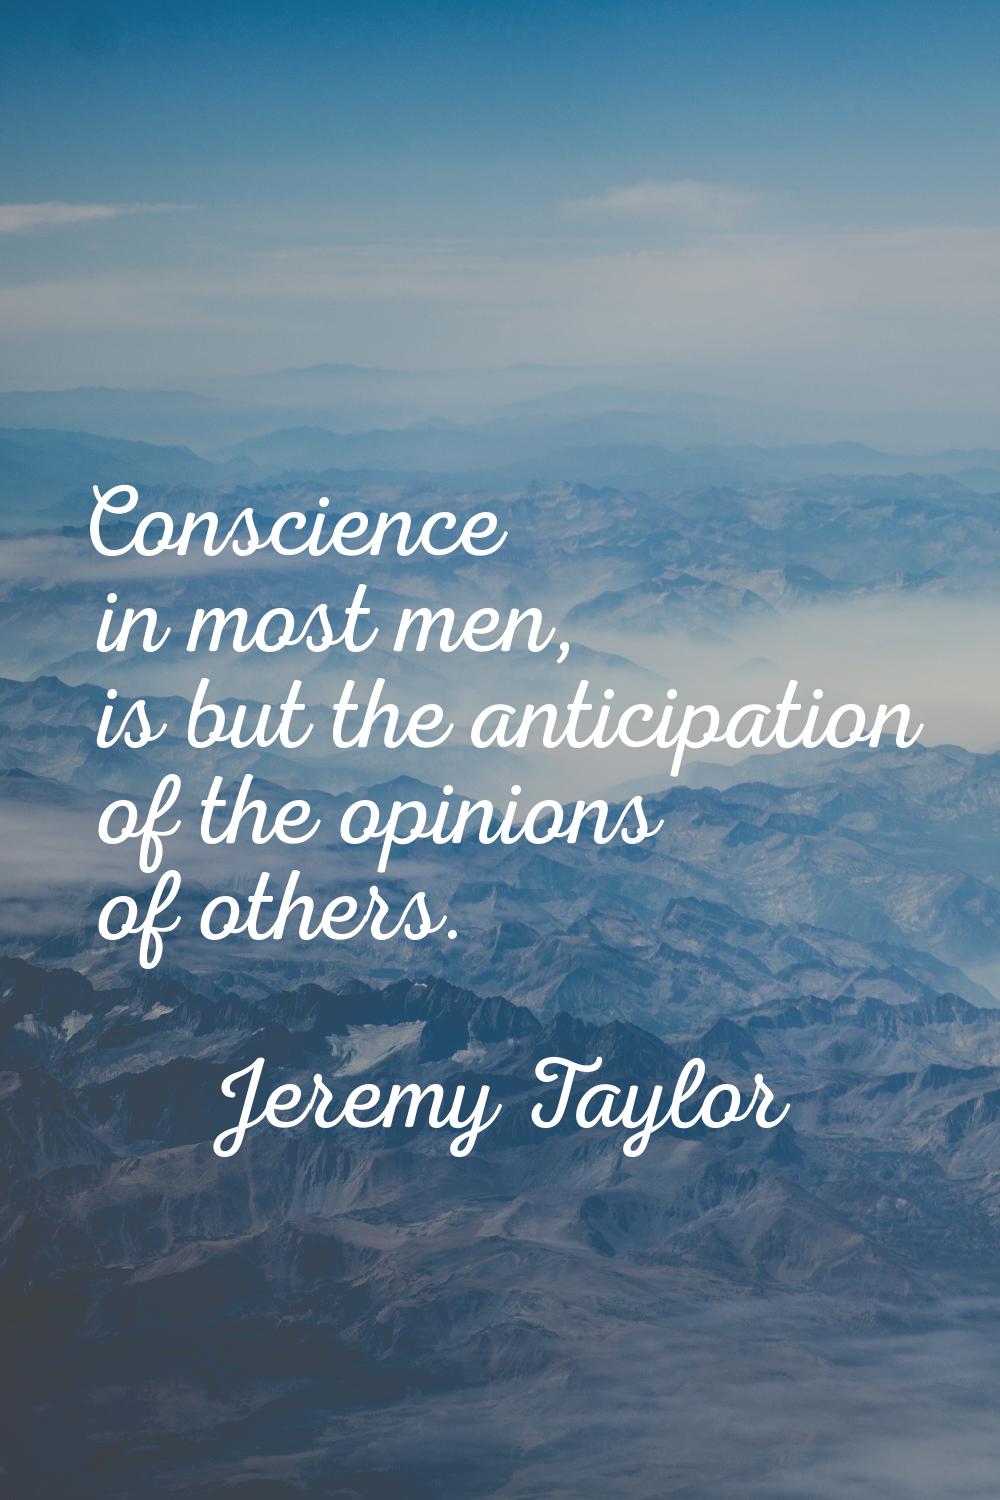 Conscience in most men, is but the anticipation of the opinions of others.